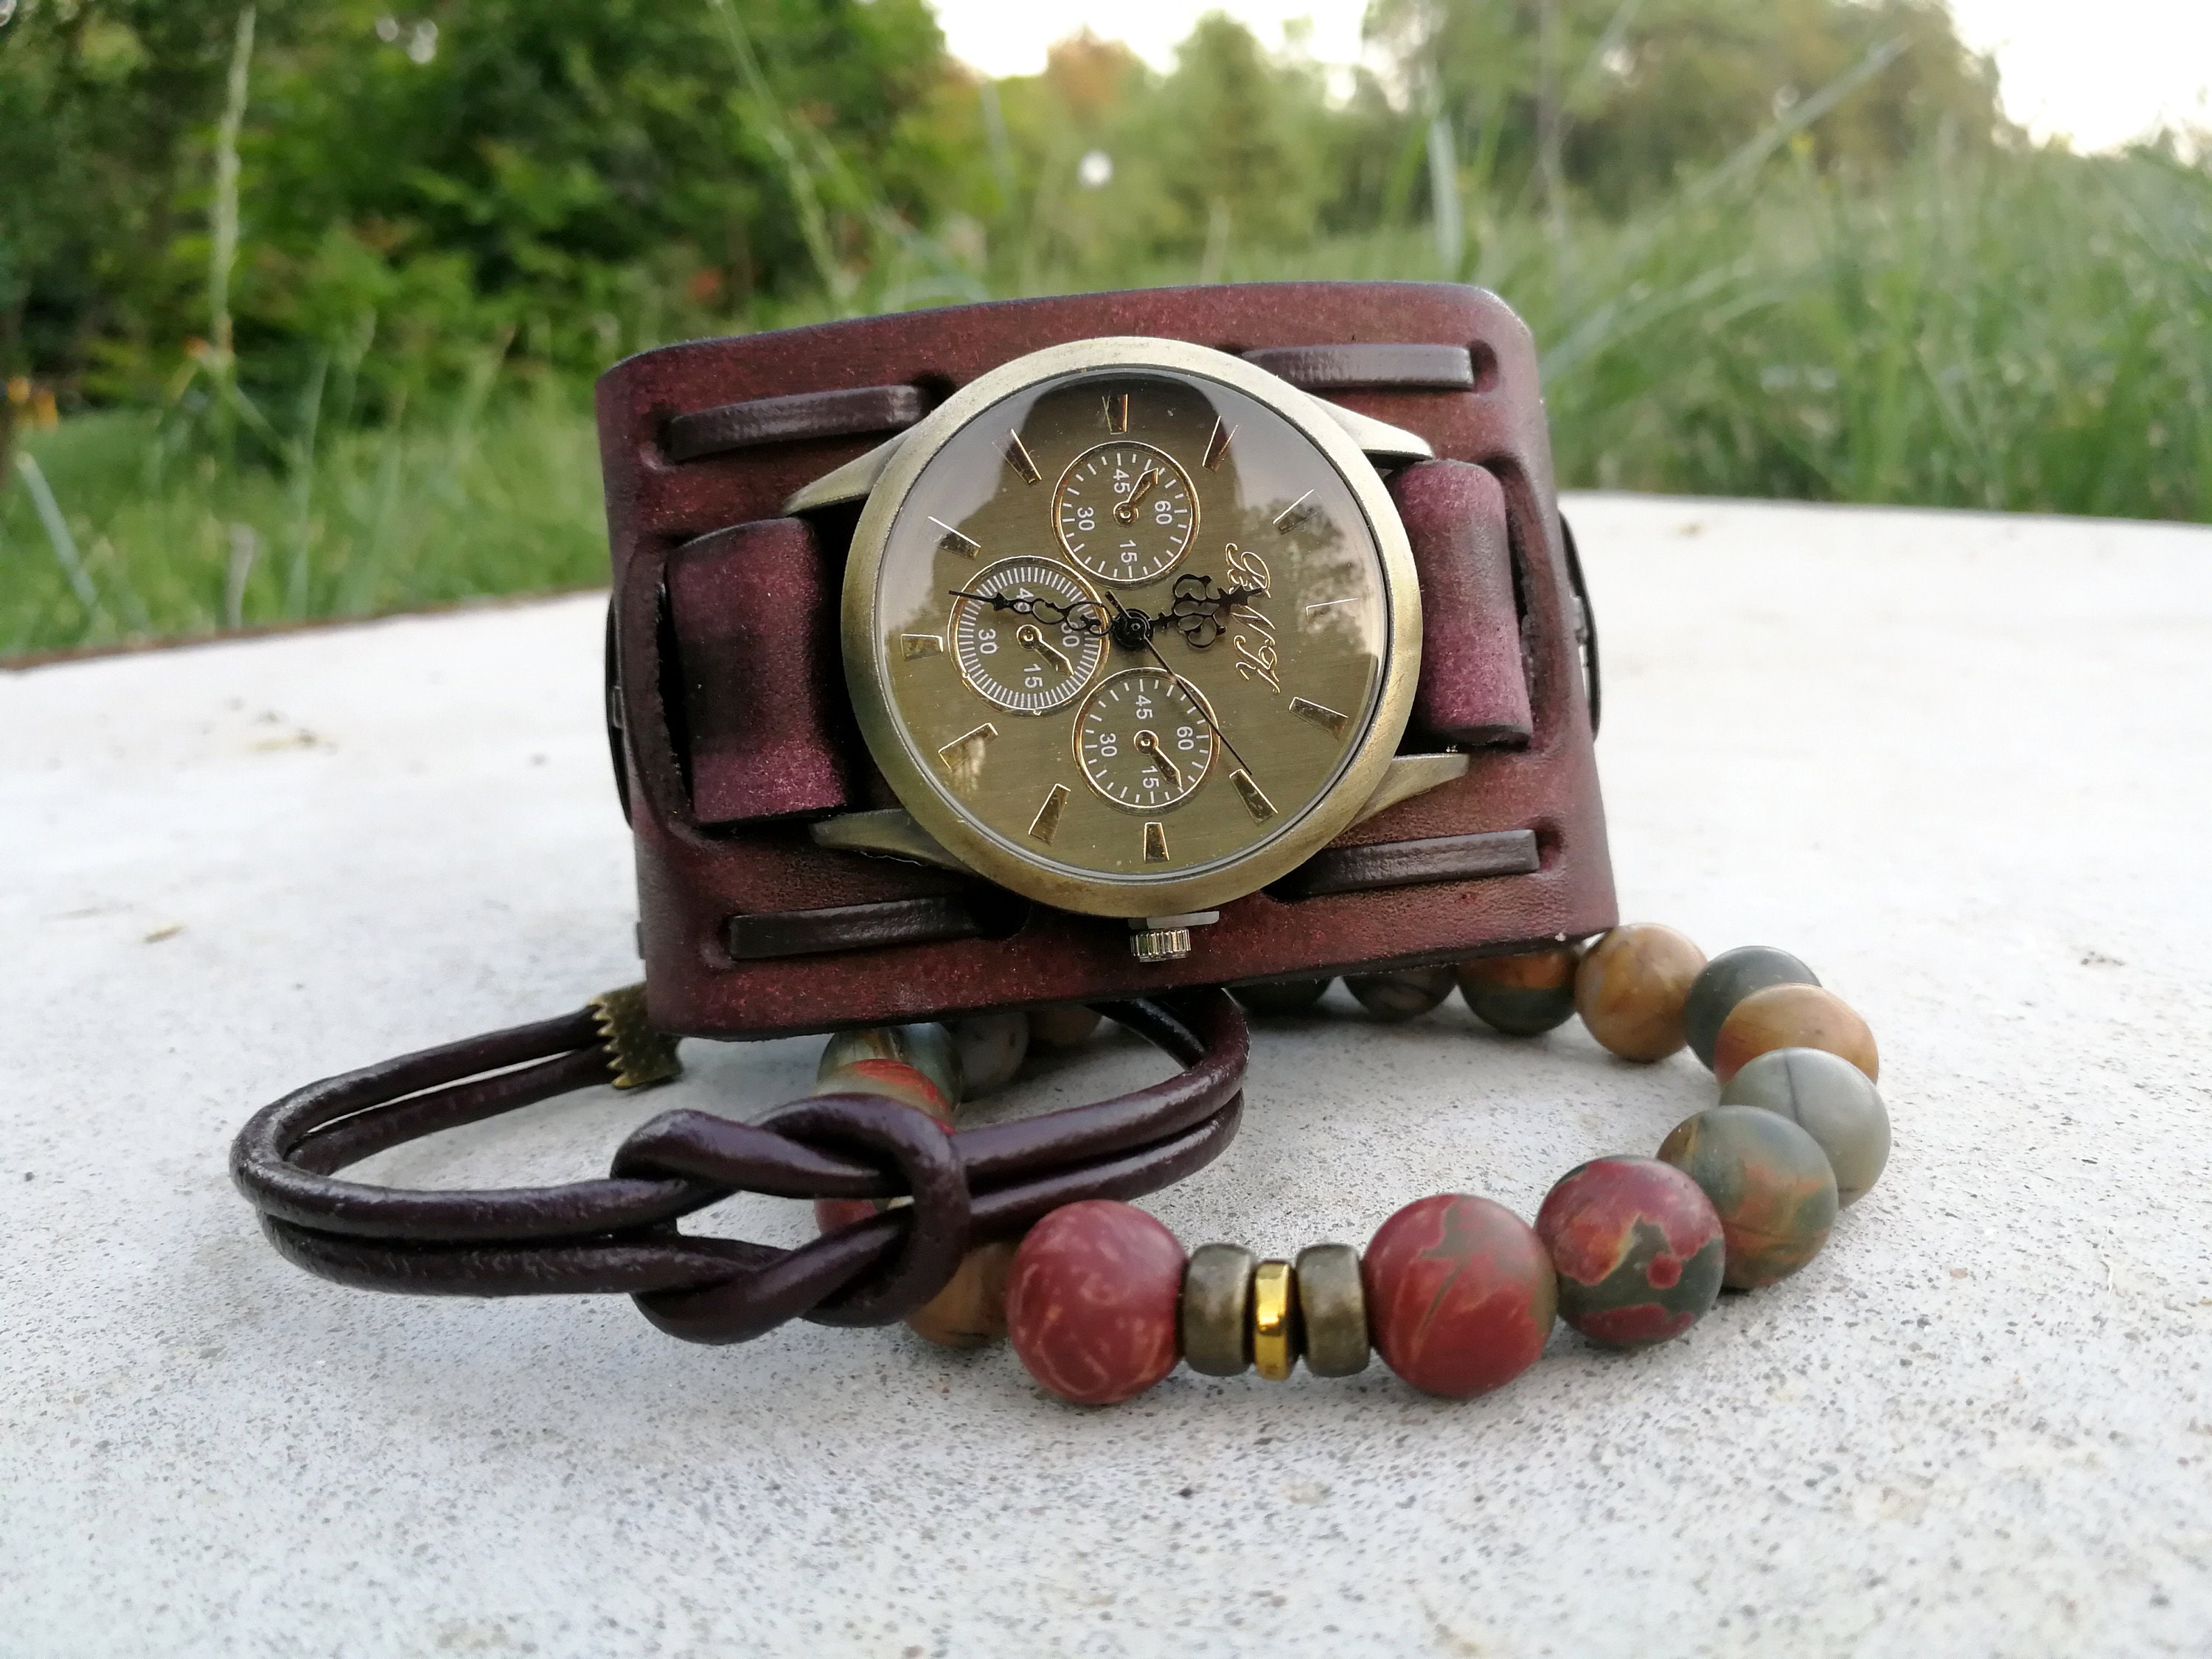 Personalized Leather Cuff Watch with metal tag